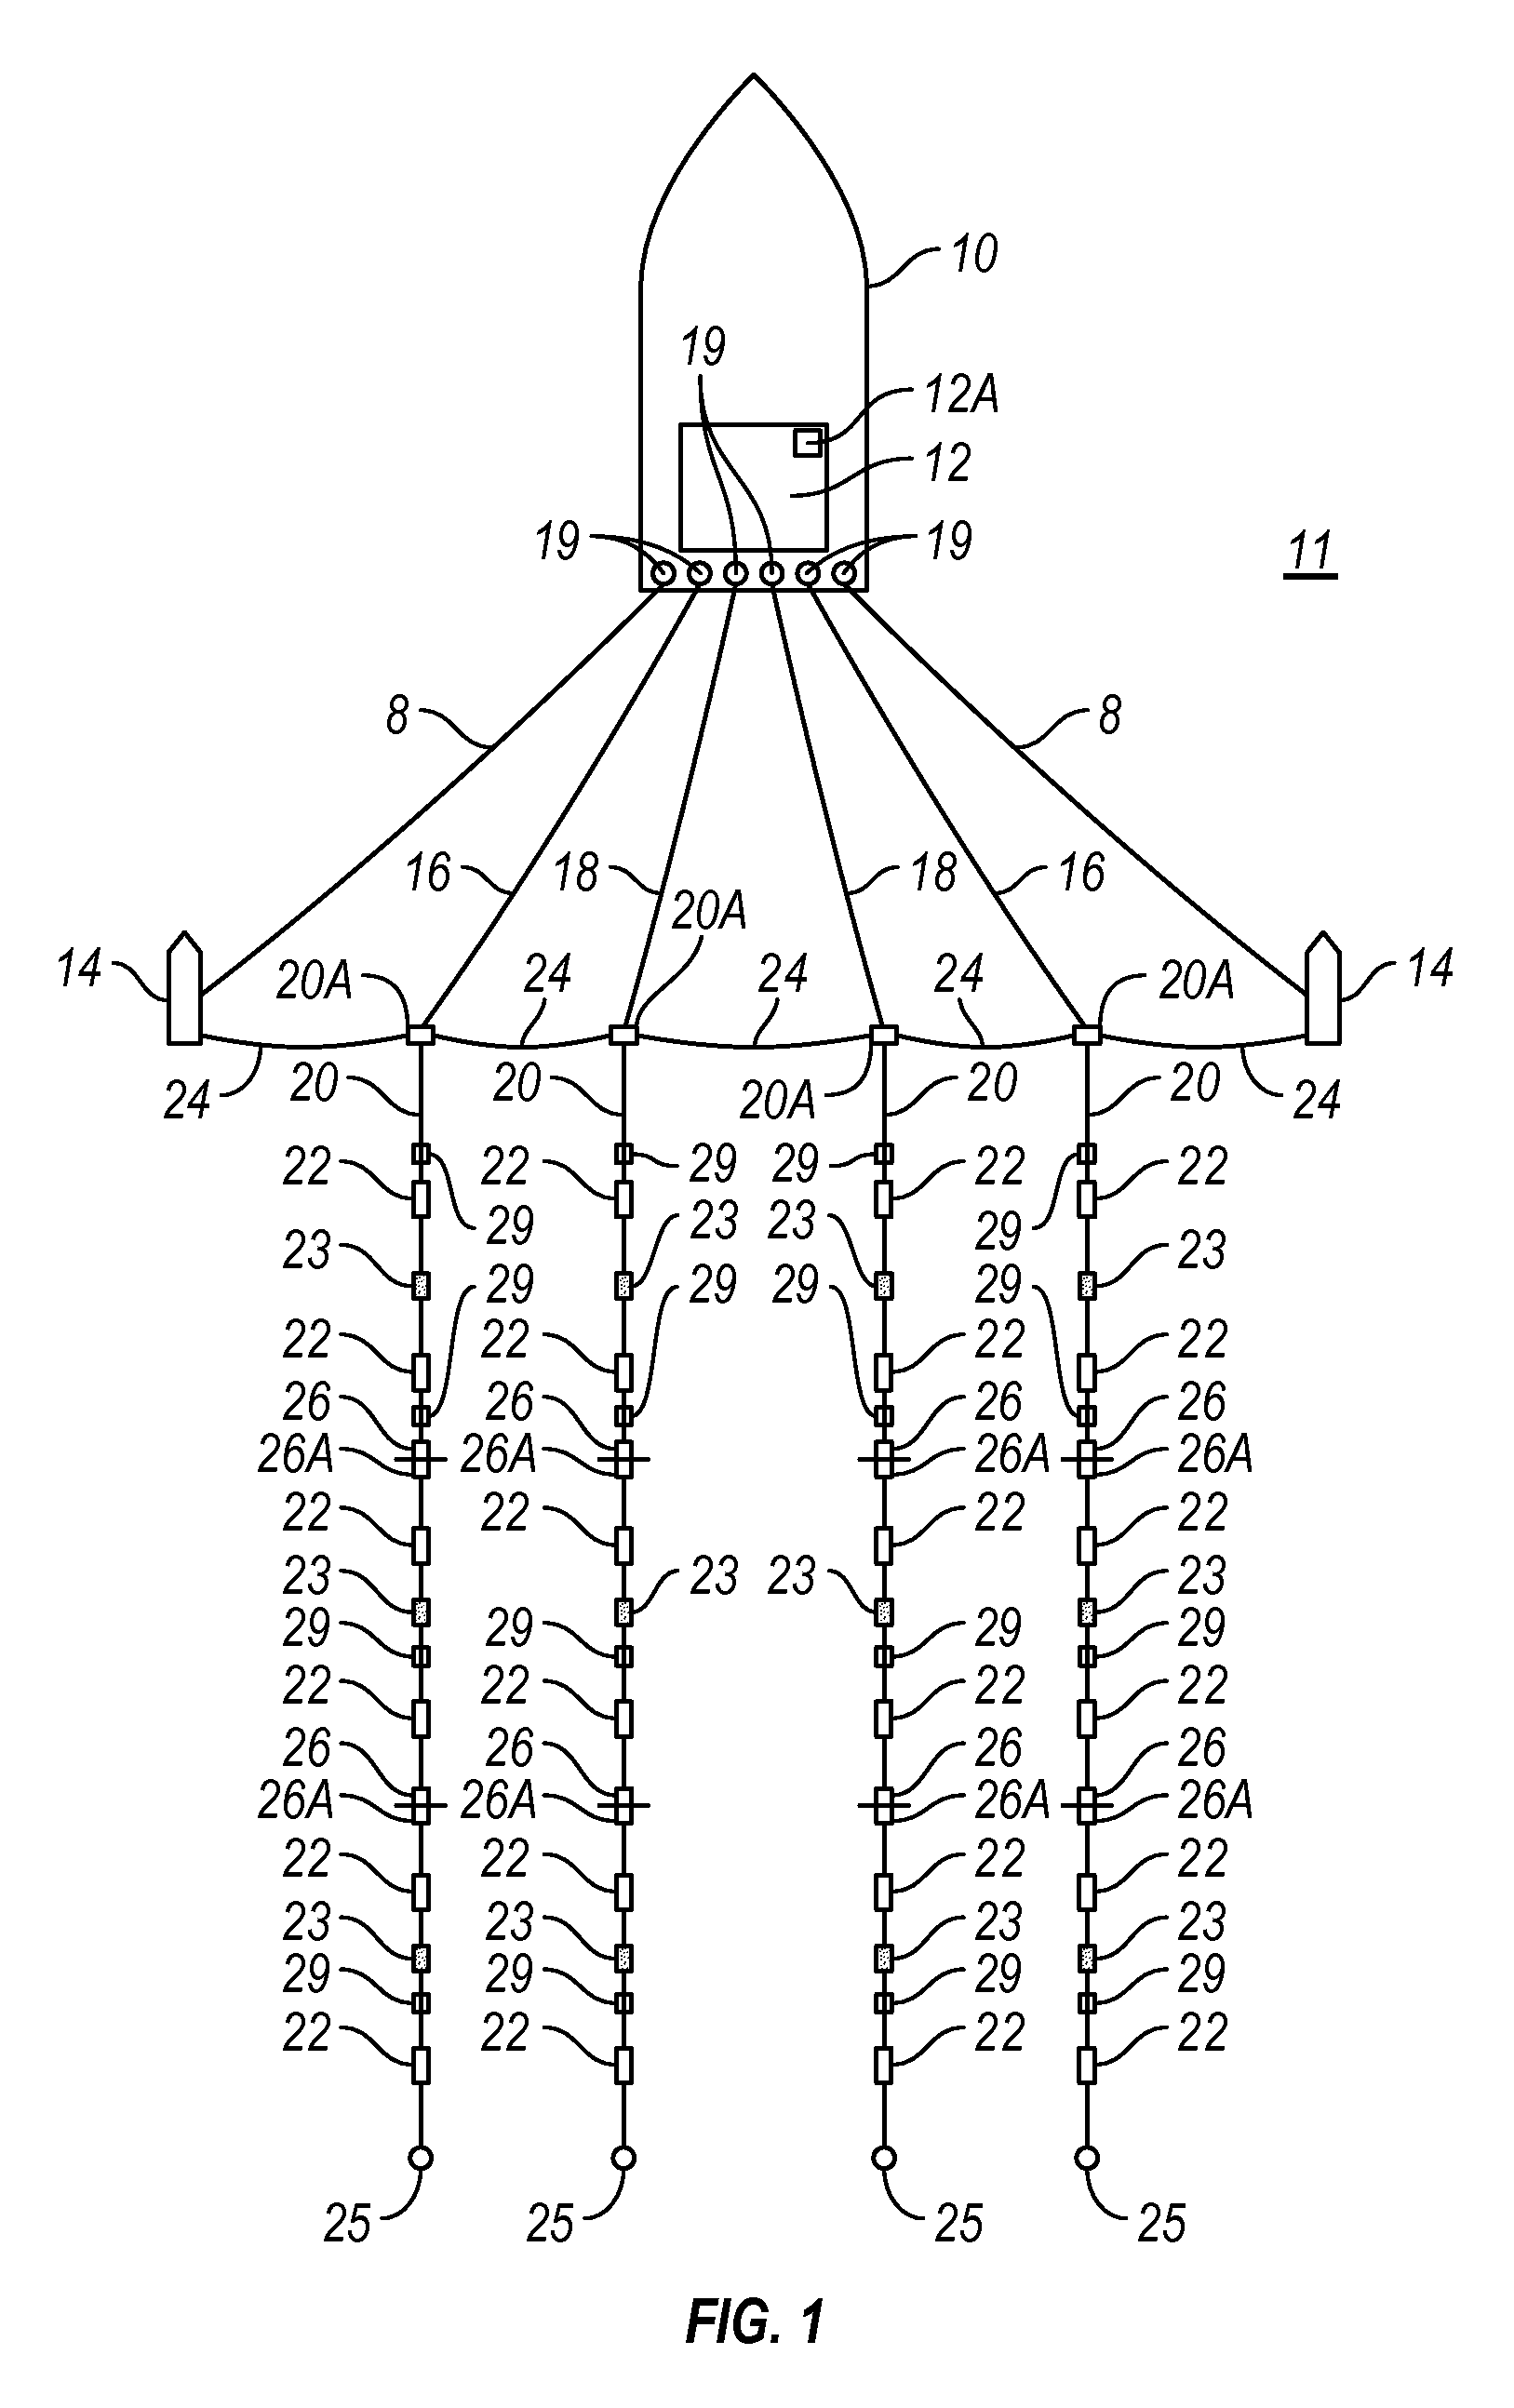 Method for determining adequacy of seismic data coverage of a subsurface area being surveyed and its application to selecting sensor array geometry